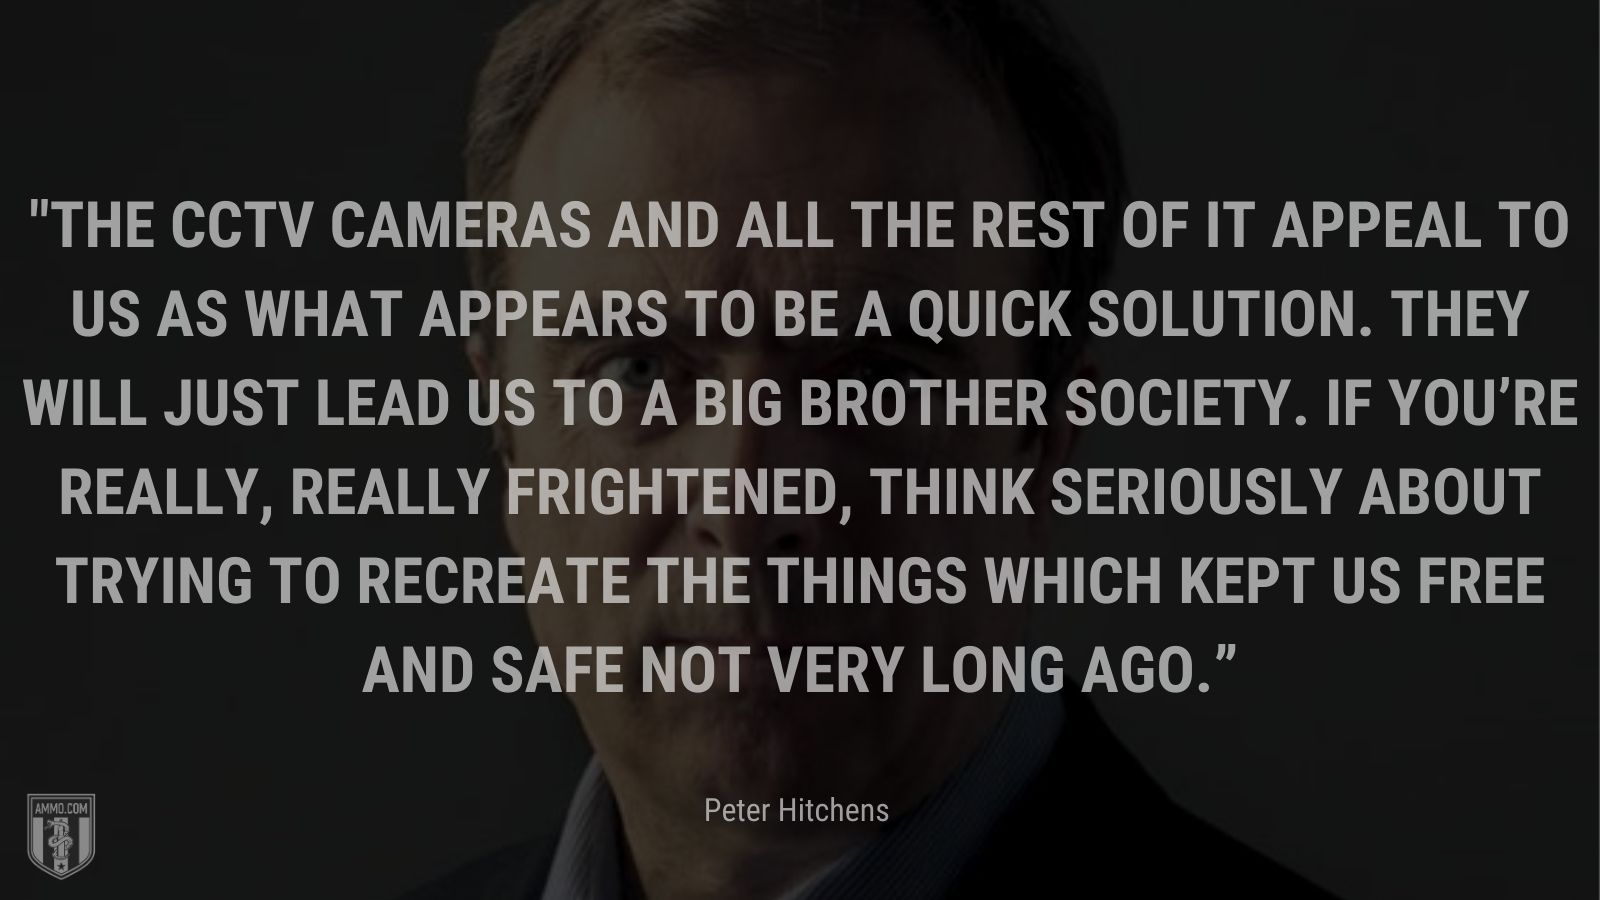 “The CCTV cameras and all the rest of it appeal to us as what appears to be a quick solution. They will just lead us to a Big Brother society. If you’re really, really frightened, think seriously about trying to recreate the things which kept us free and safe not very long ago” - Peter Hitchens